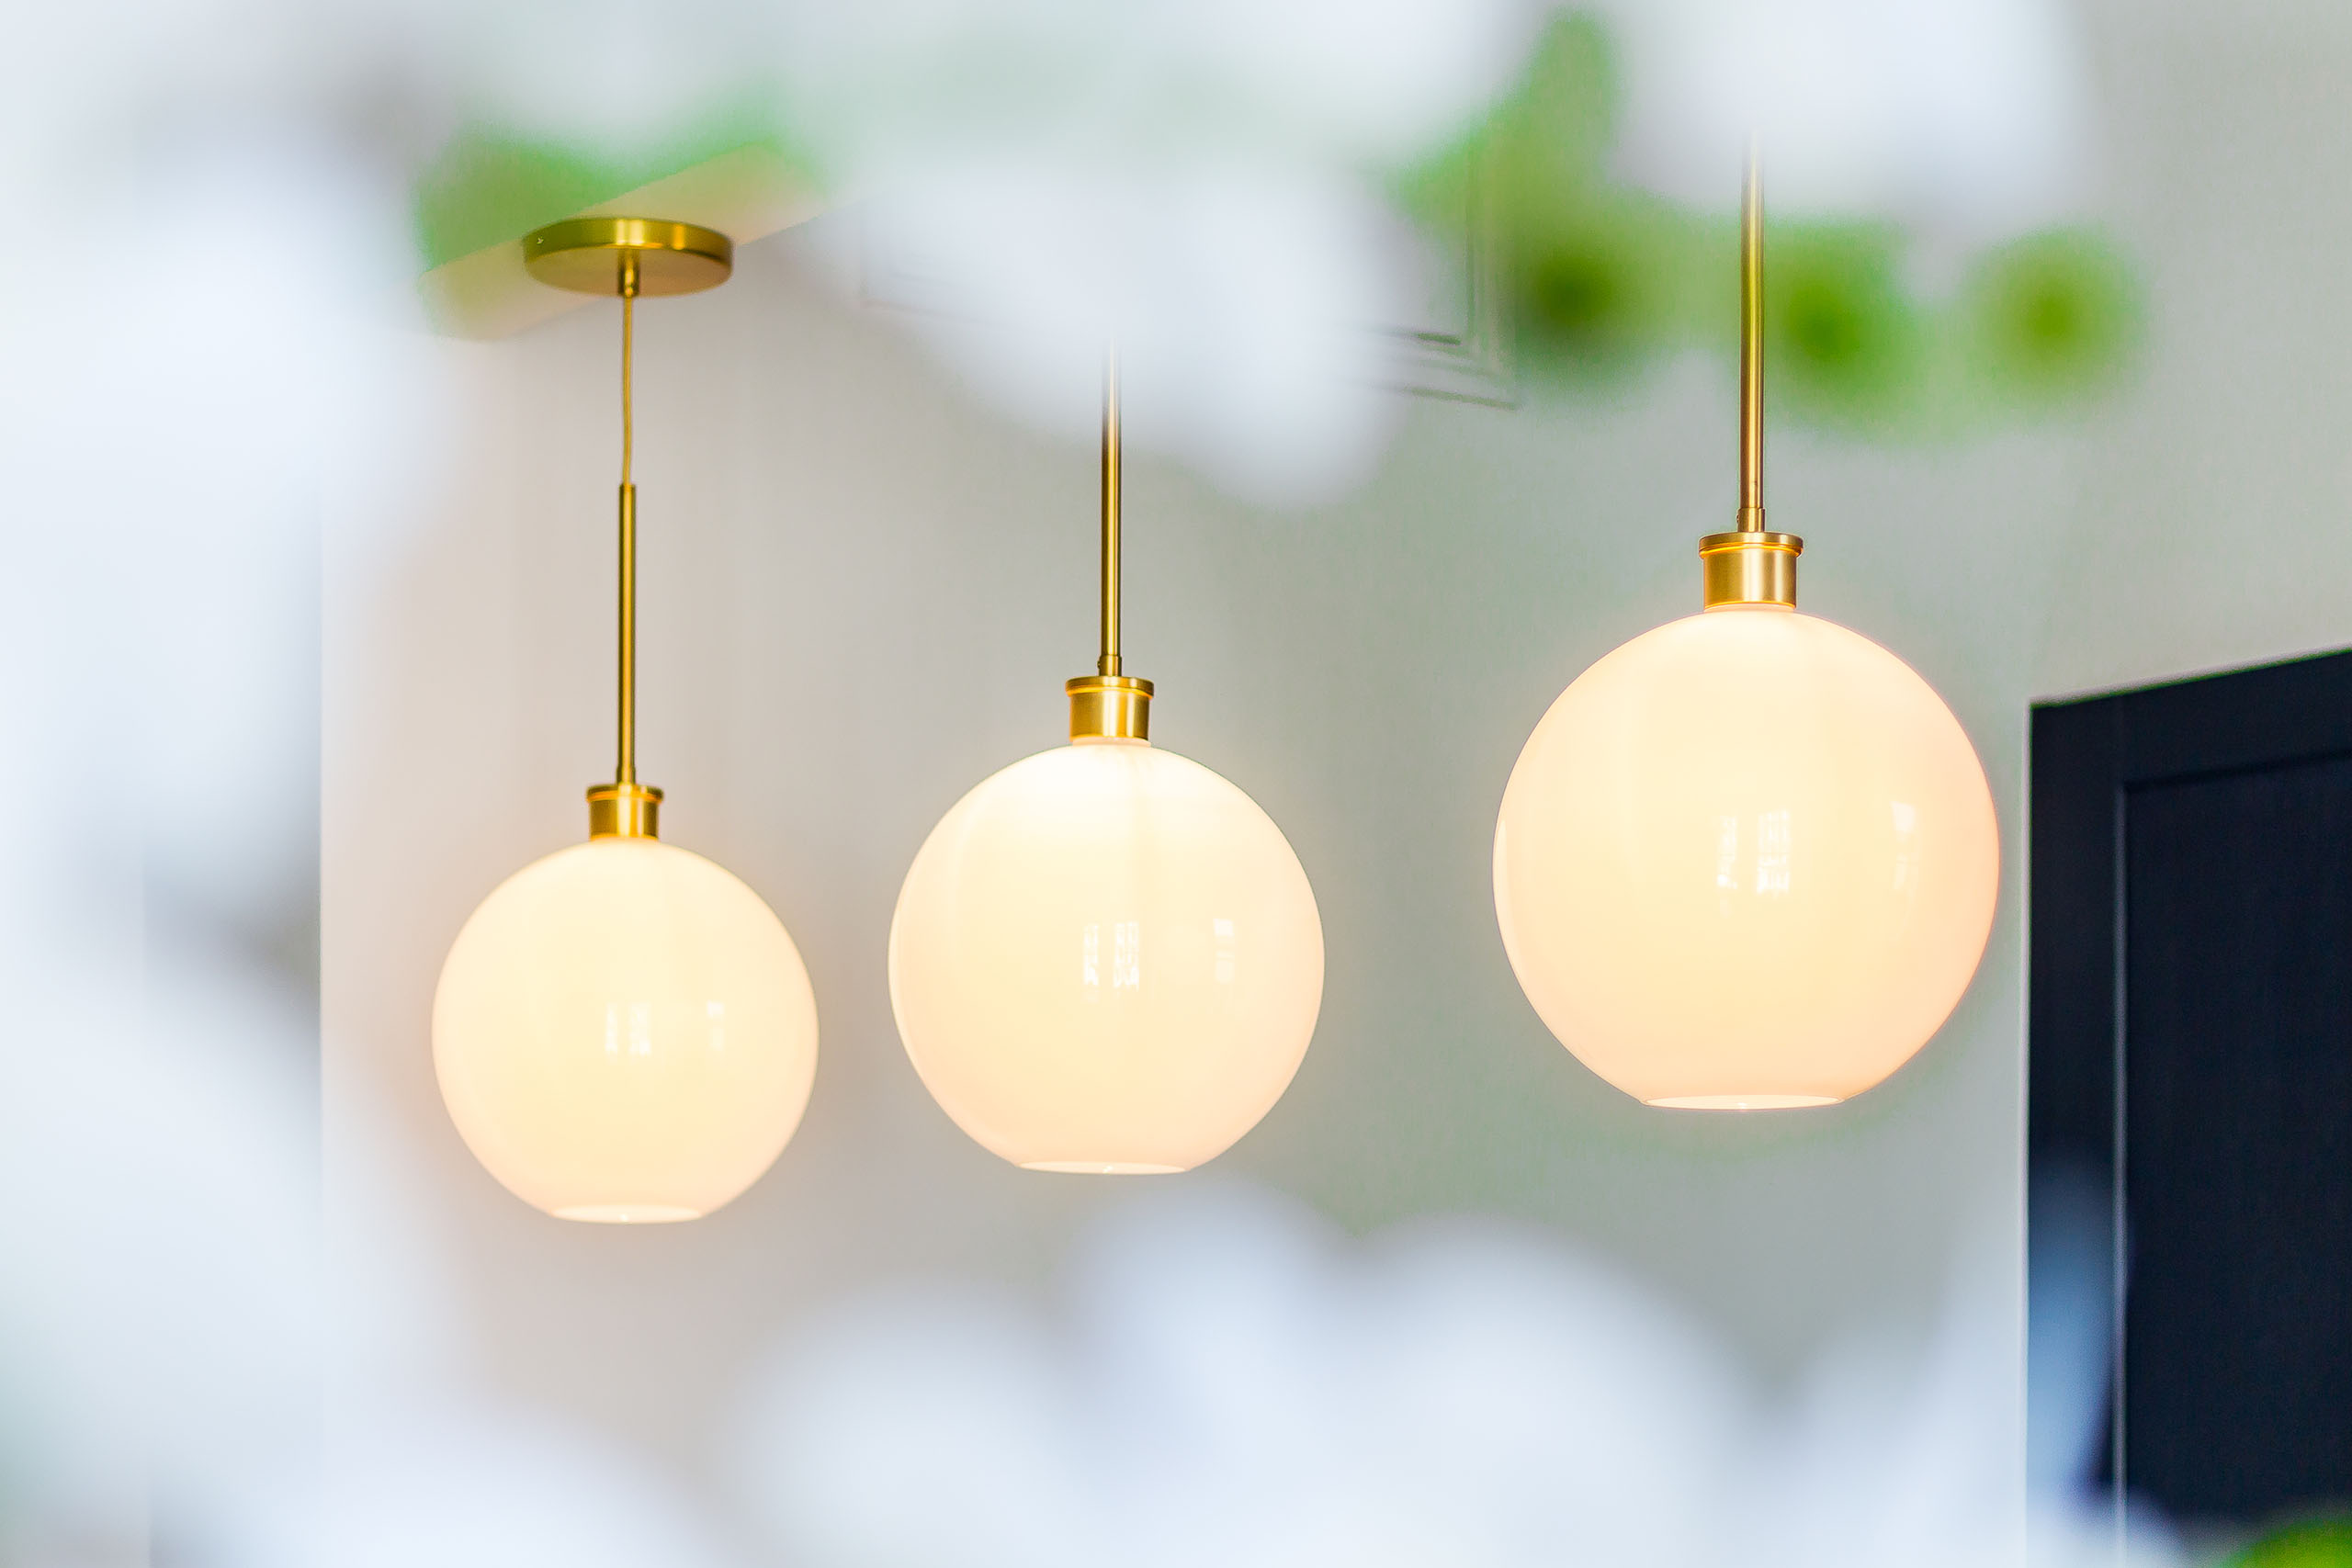 Three hanging ball light fittings in a living room